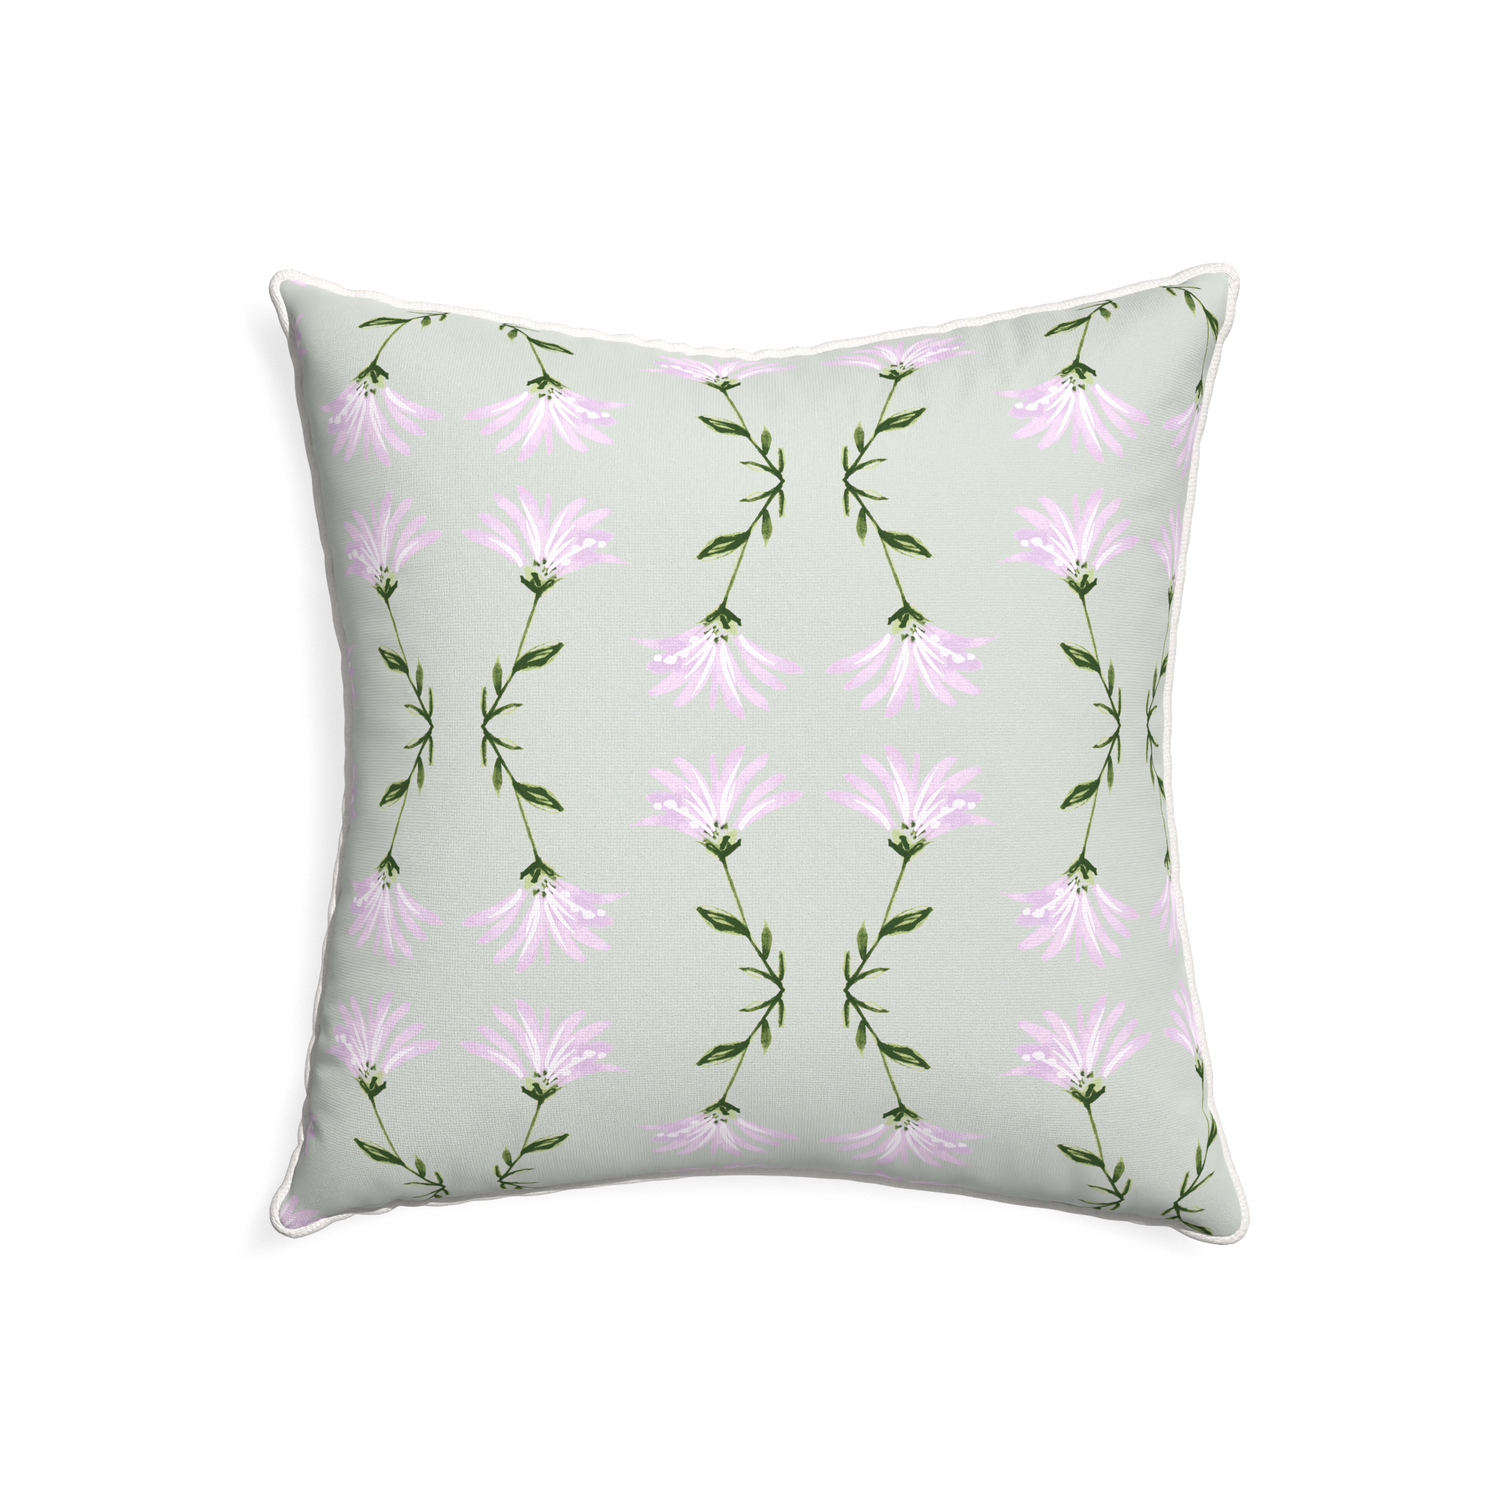 22-square marina sage custom pillow with snow piping on white background